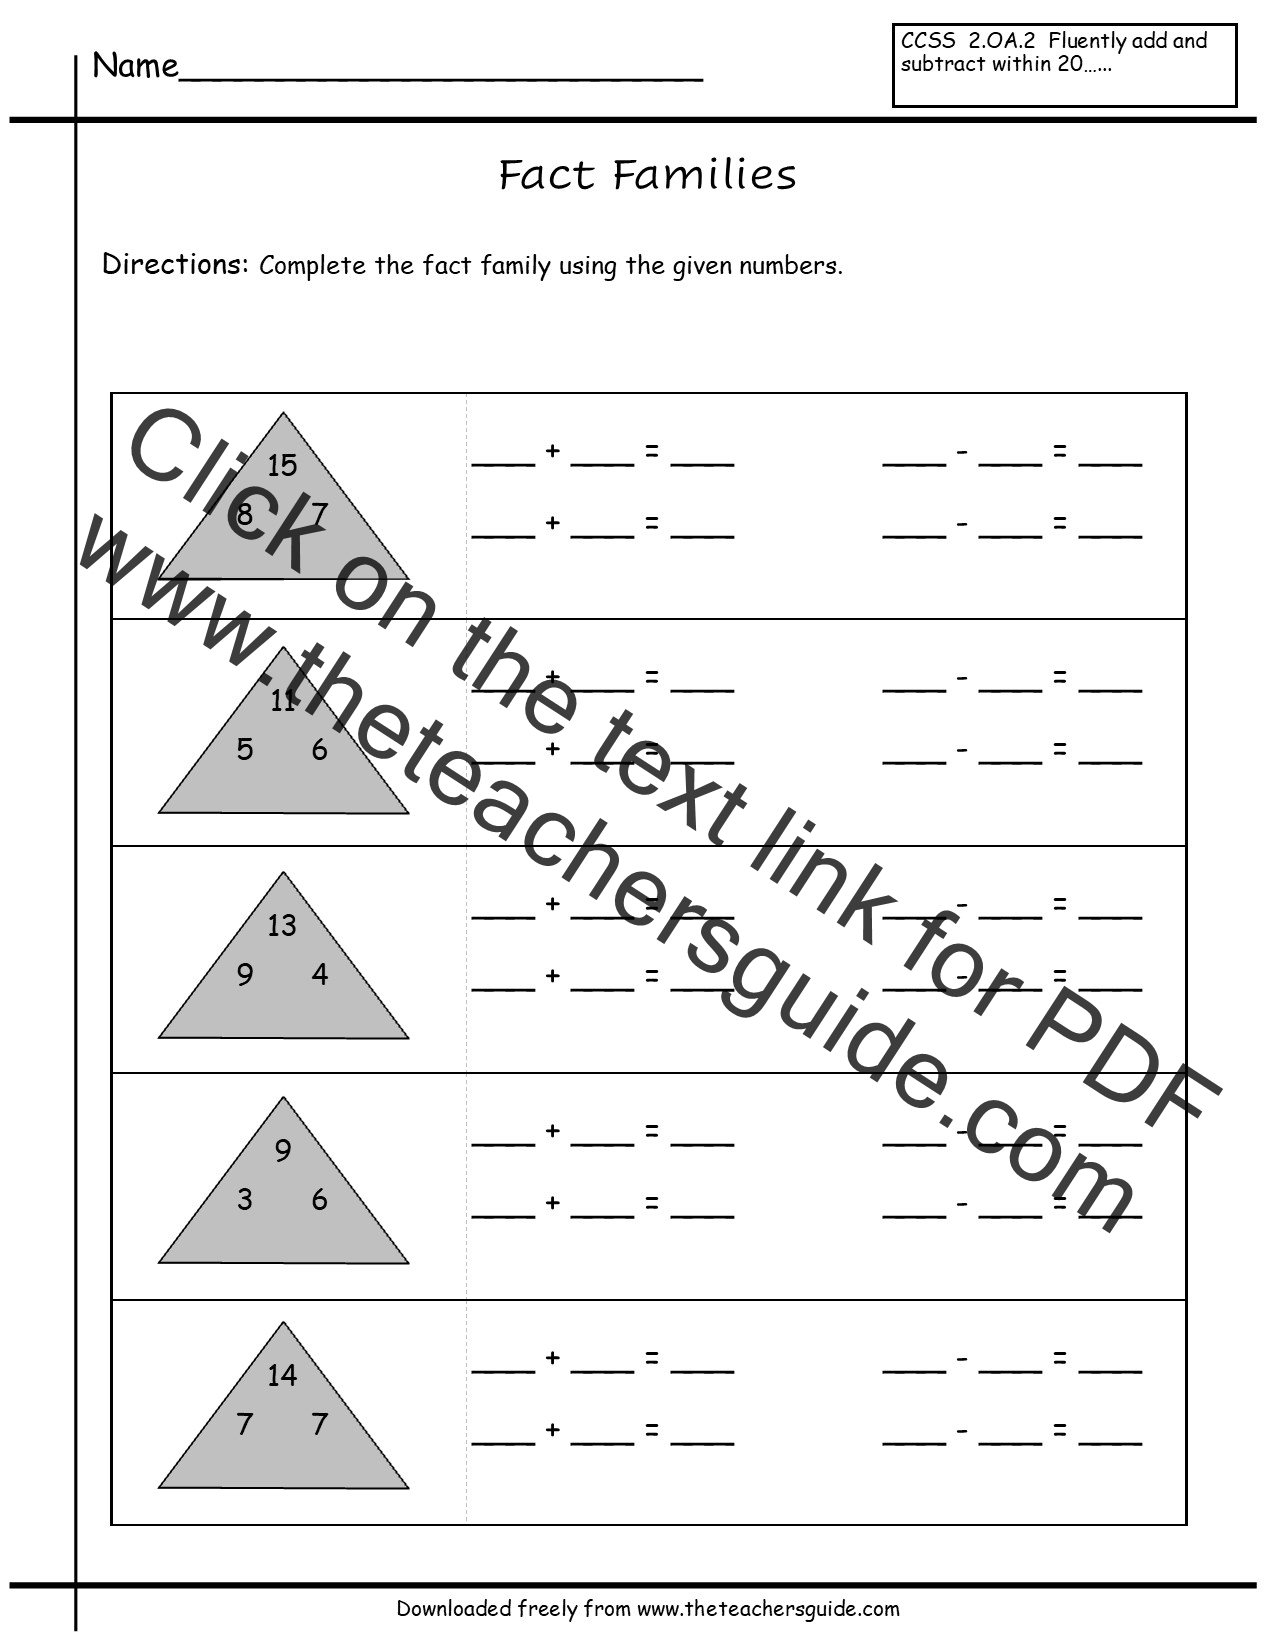 math-fact-families-worksheets-activity-shelter